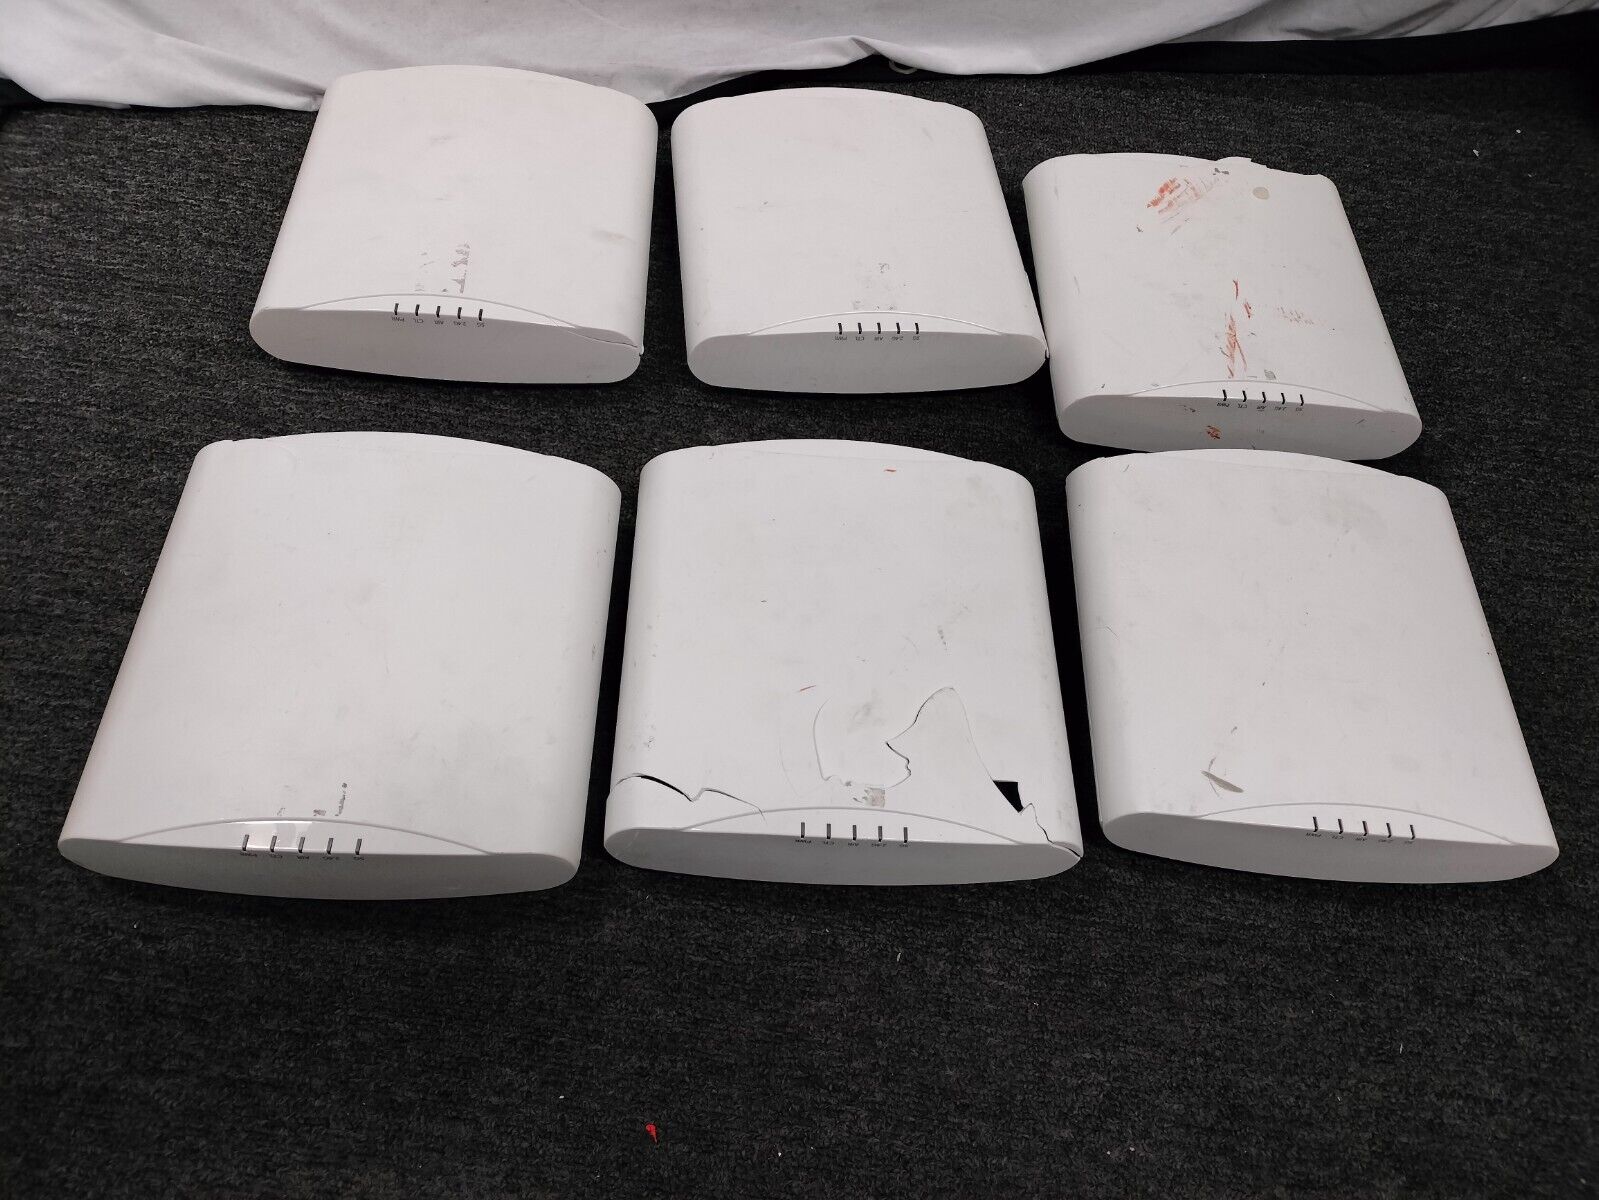 (LOT OF 6) Ruckus R720 (901-R720-US00) wireless access point *FOR PARTS*